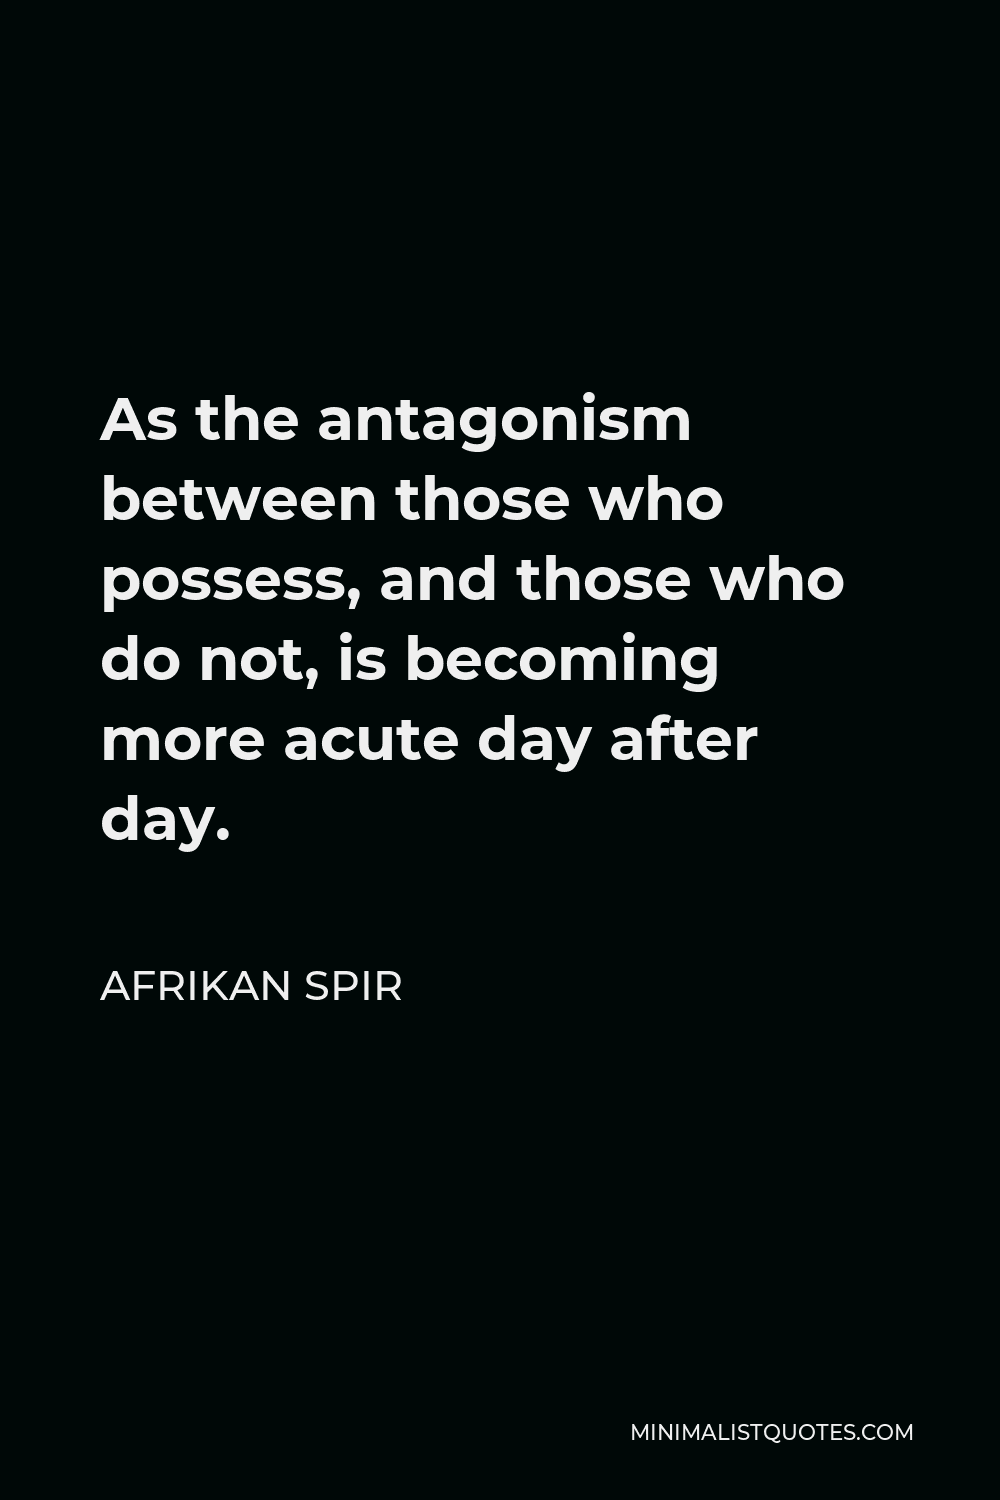 Afrikan Spir Quote - As the antagonism between those who possess, and those who do not, is becoming more acute day after day.